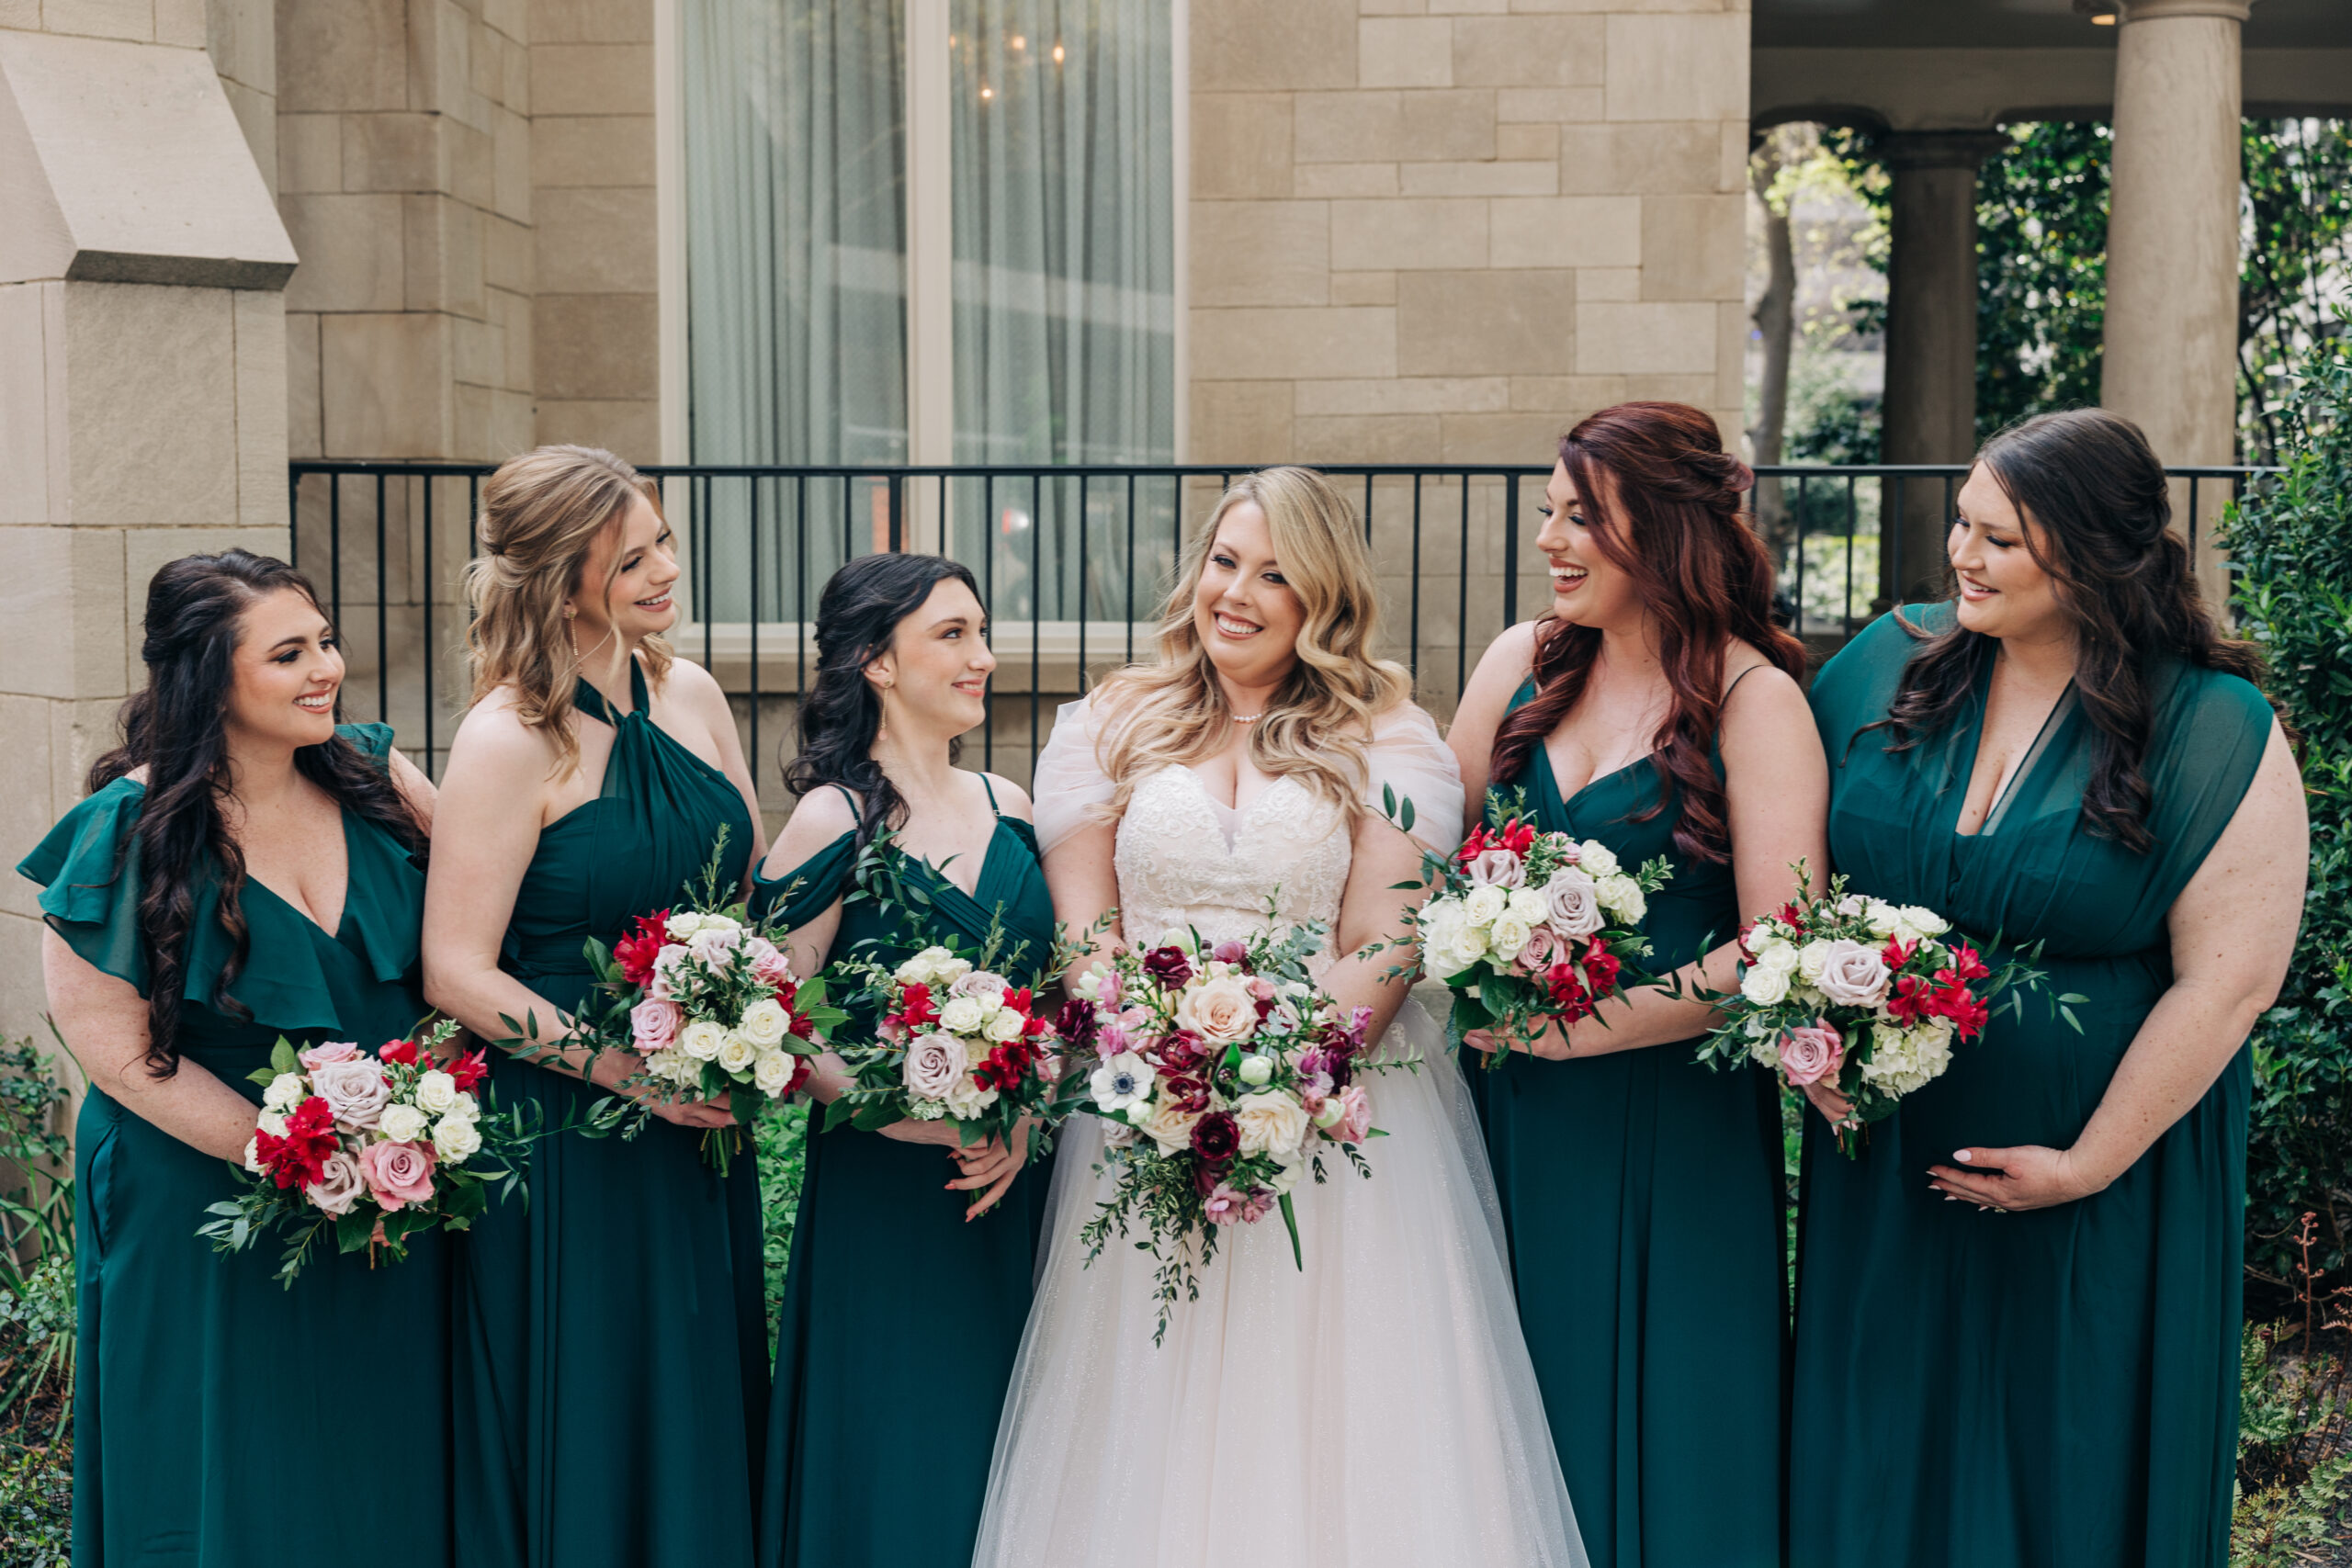 A bride smiles big while her bridesmaids smile at her and hold their bouquets